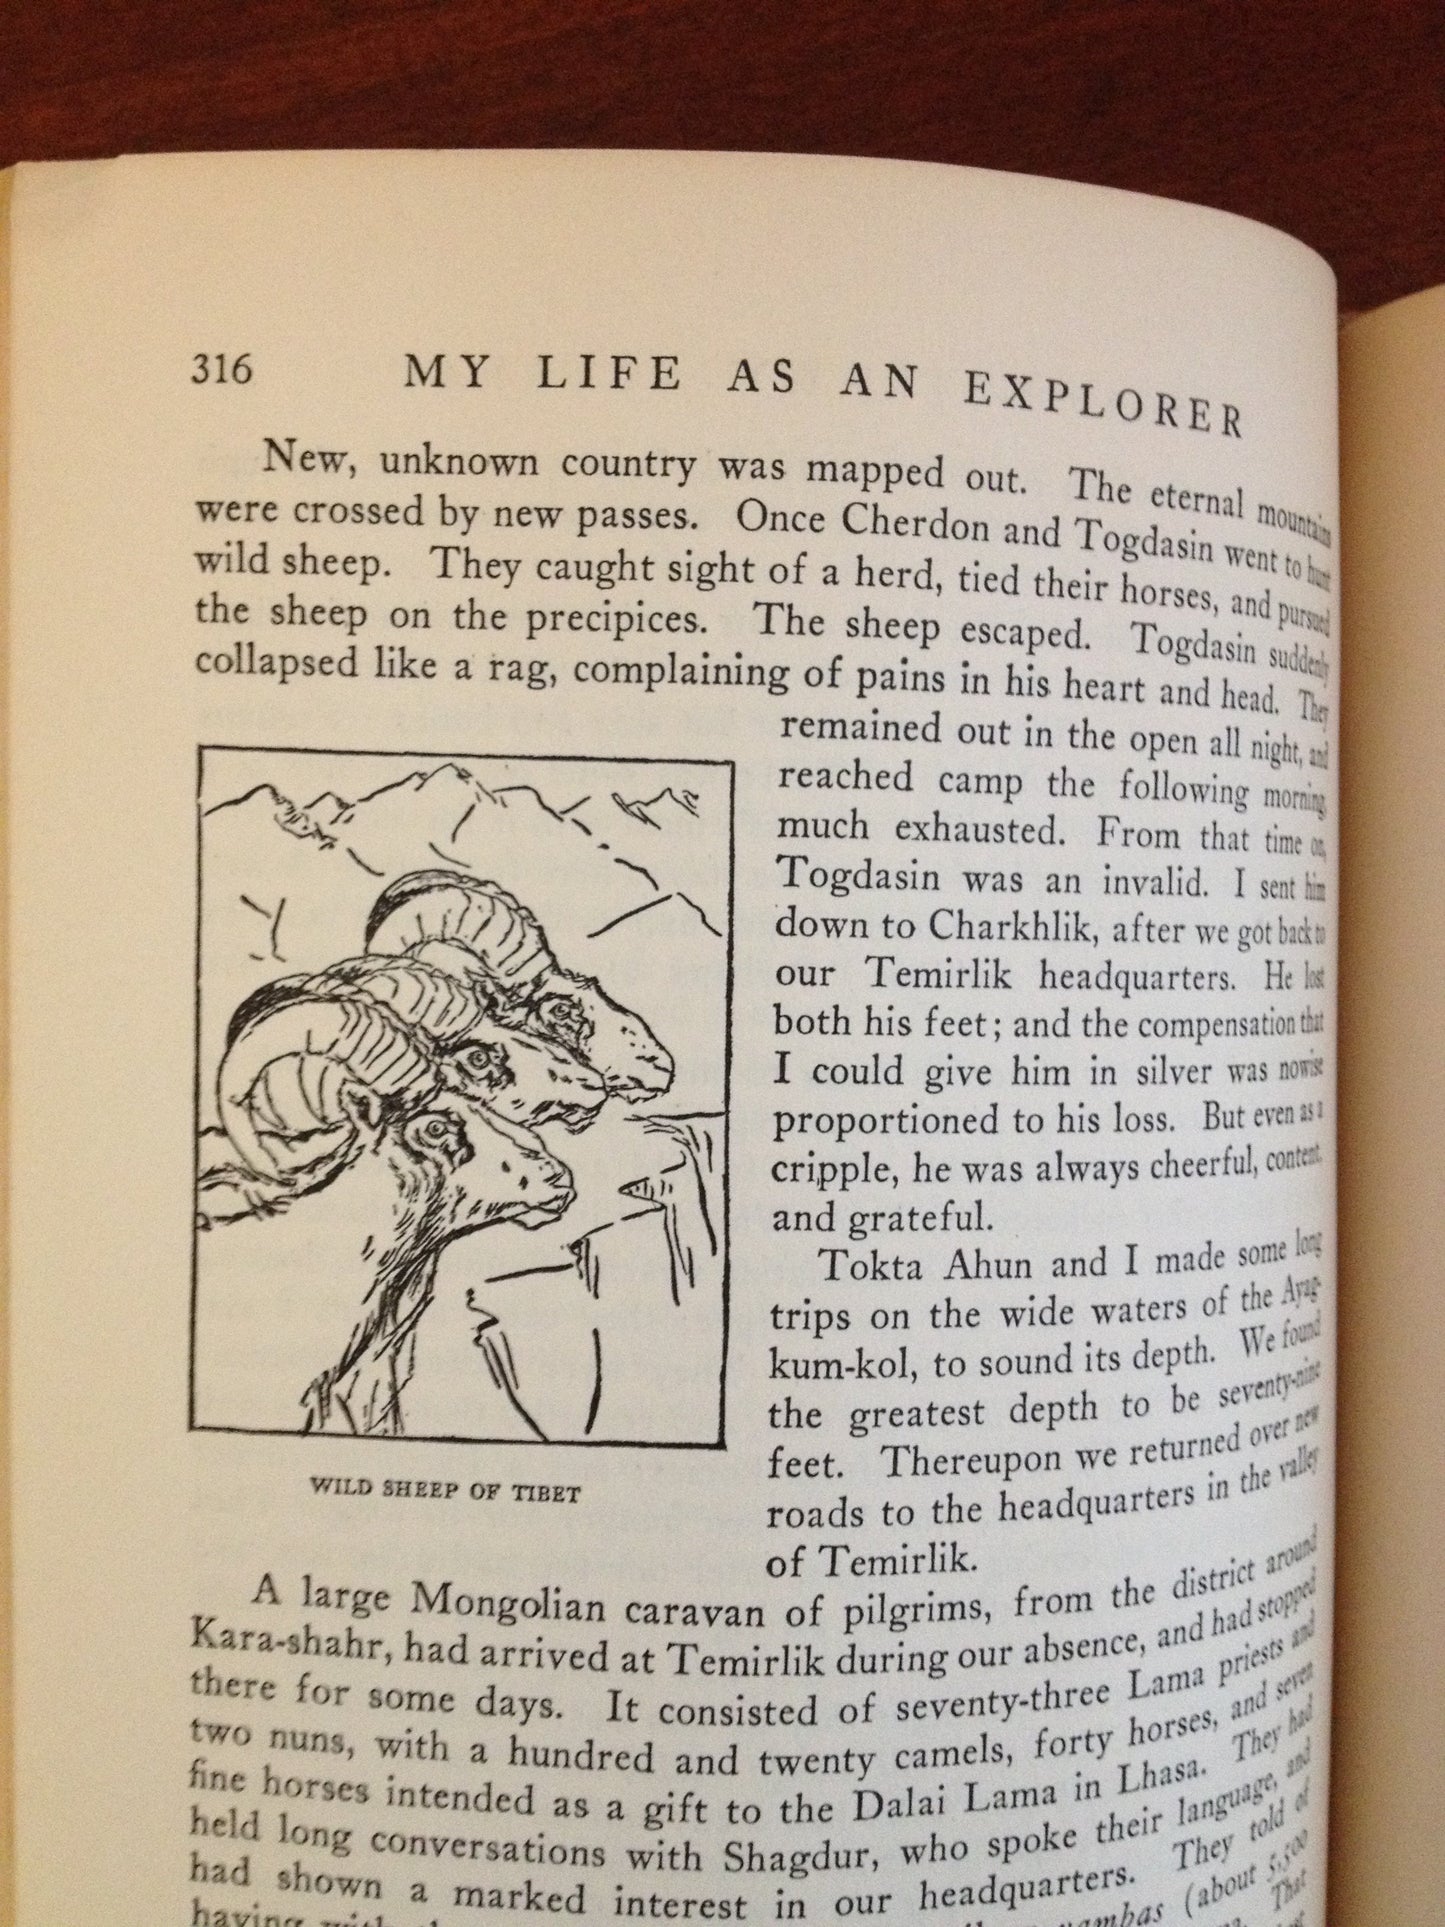 MY LIFE AS AN EXPLORER  BY: SVEN HEDIN BooksCardsNBikes